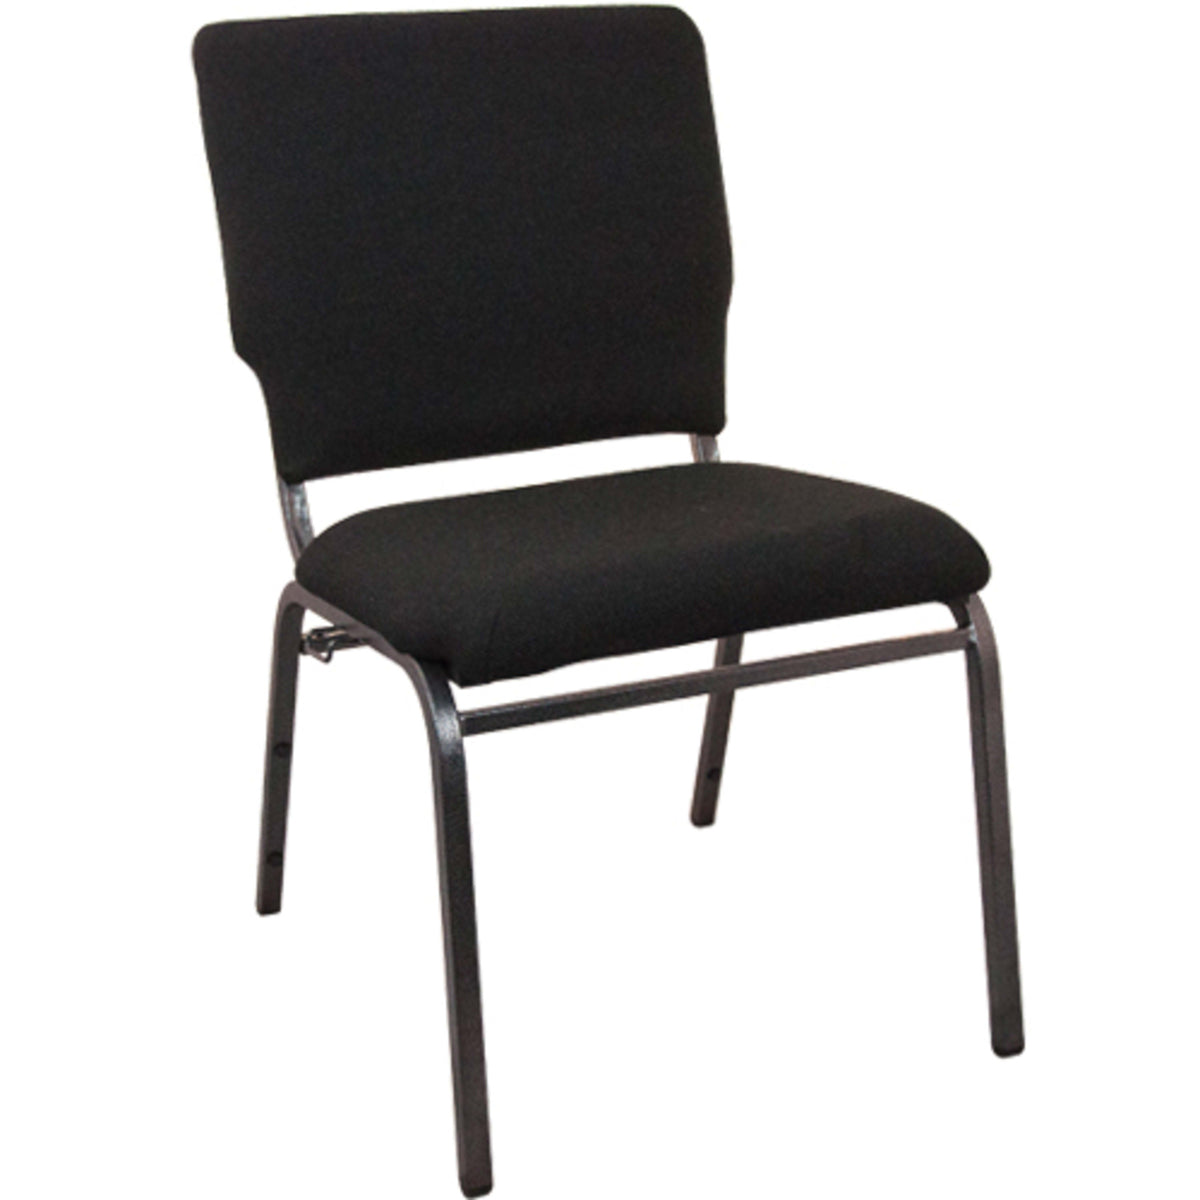 Black Fabric/Silver Vein Frame |#| Black Multipurpose Church Chairs - 18.5 in. Wide